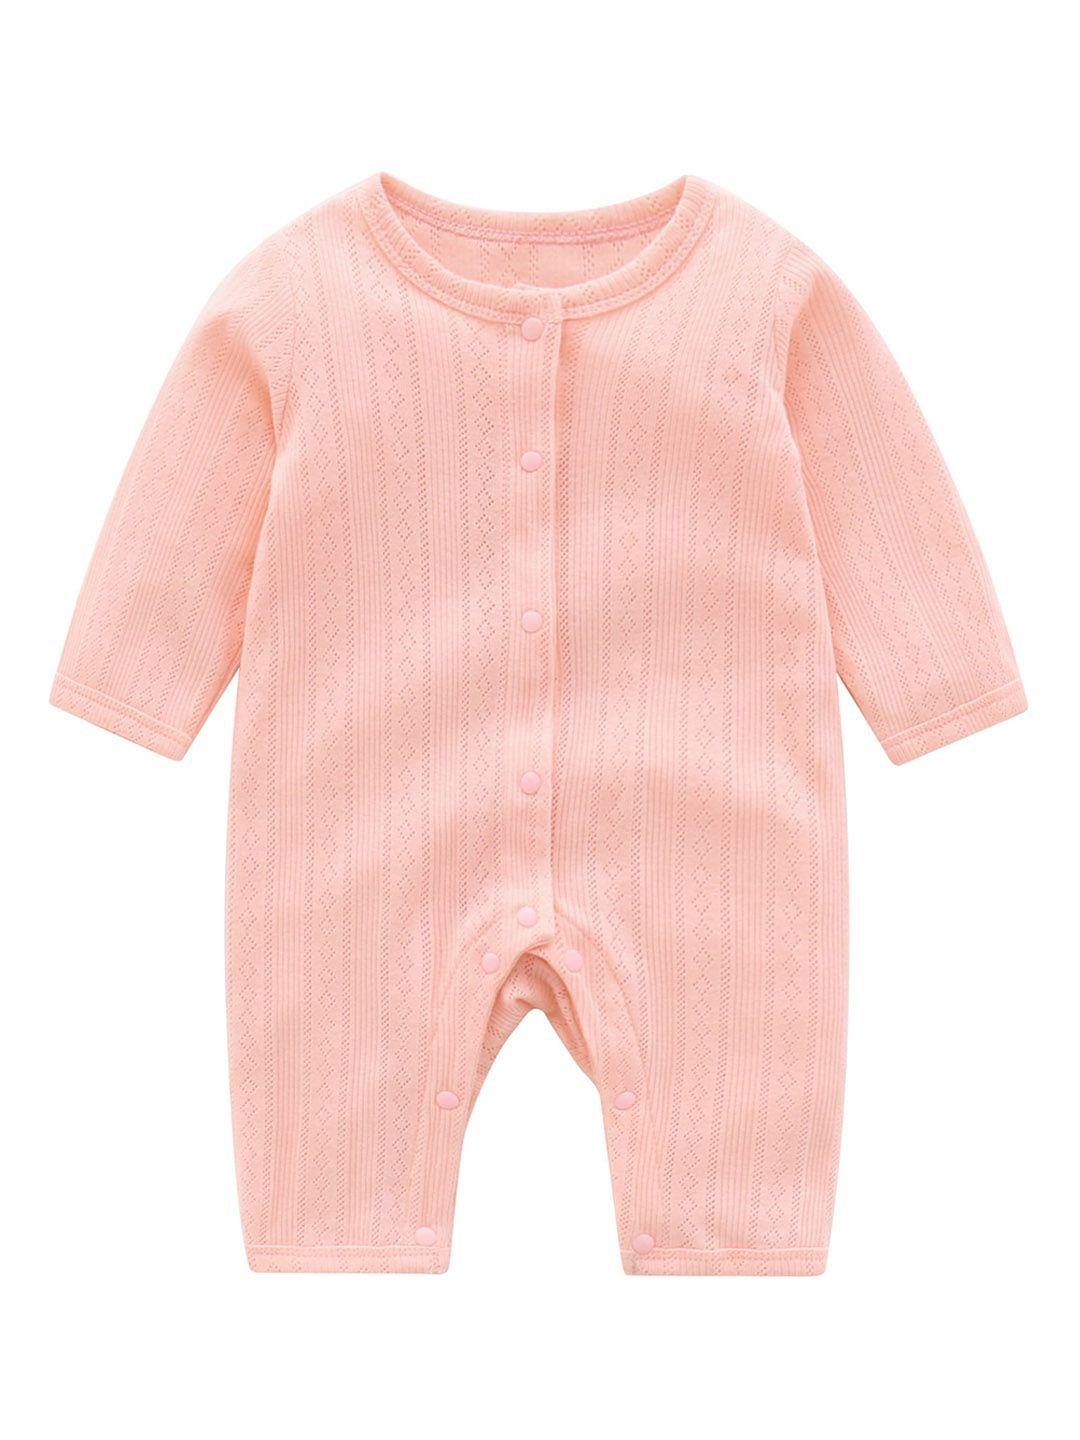 StyleCast Infant Girls Pink Self Design Cotton Rompers